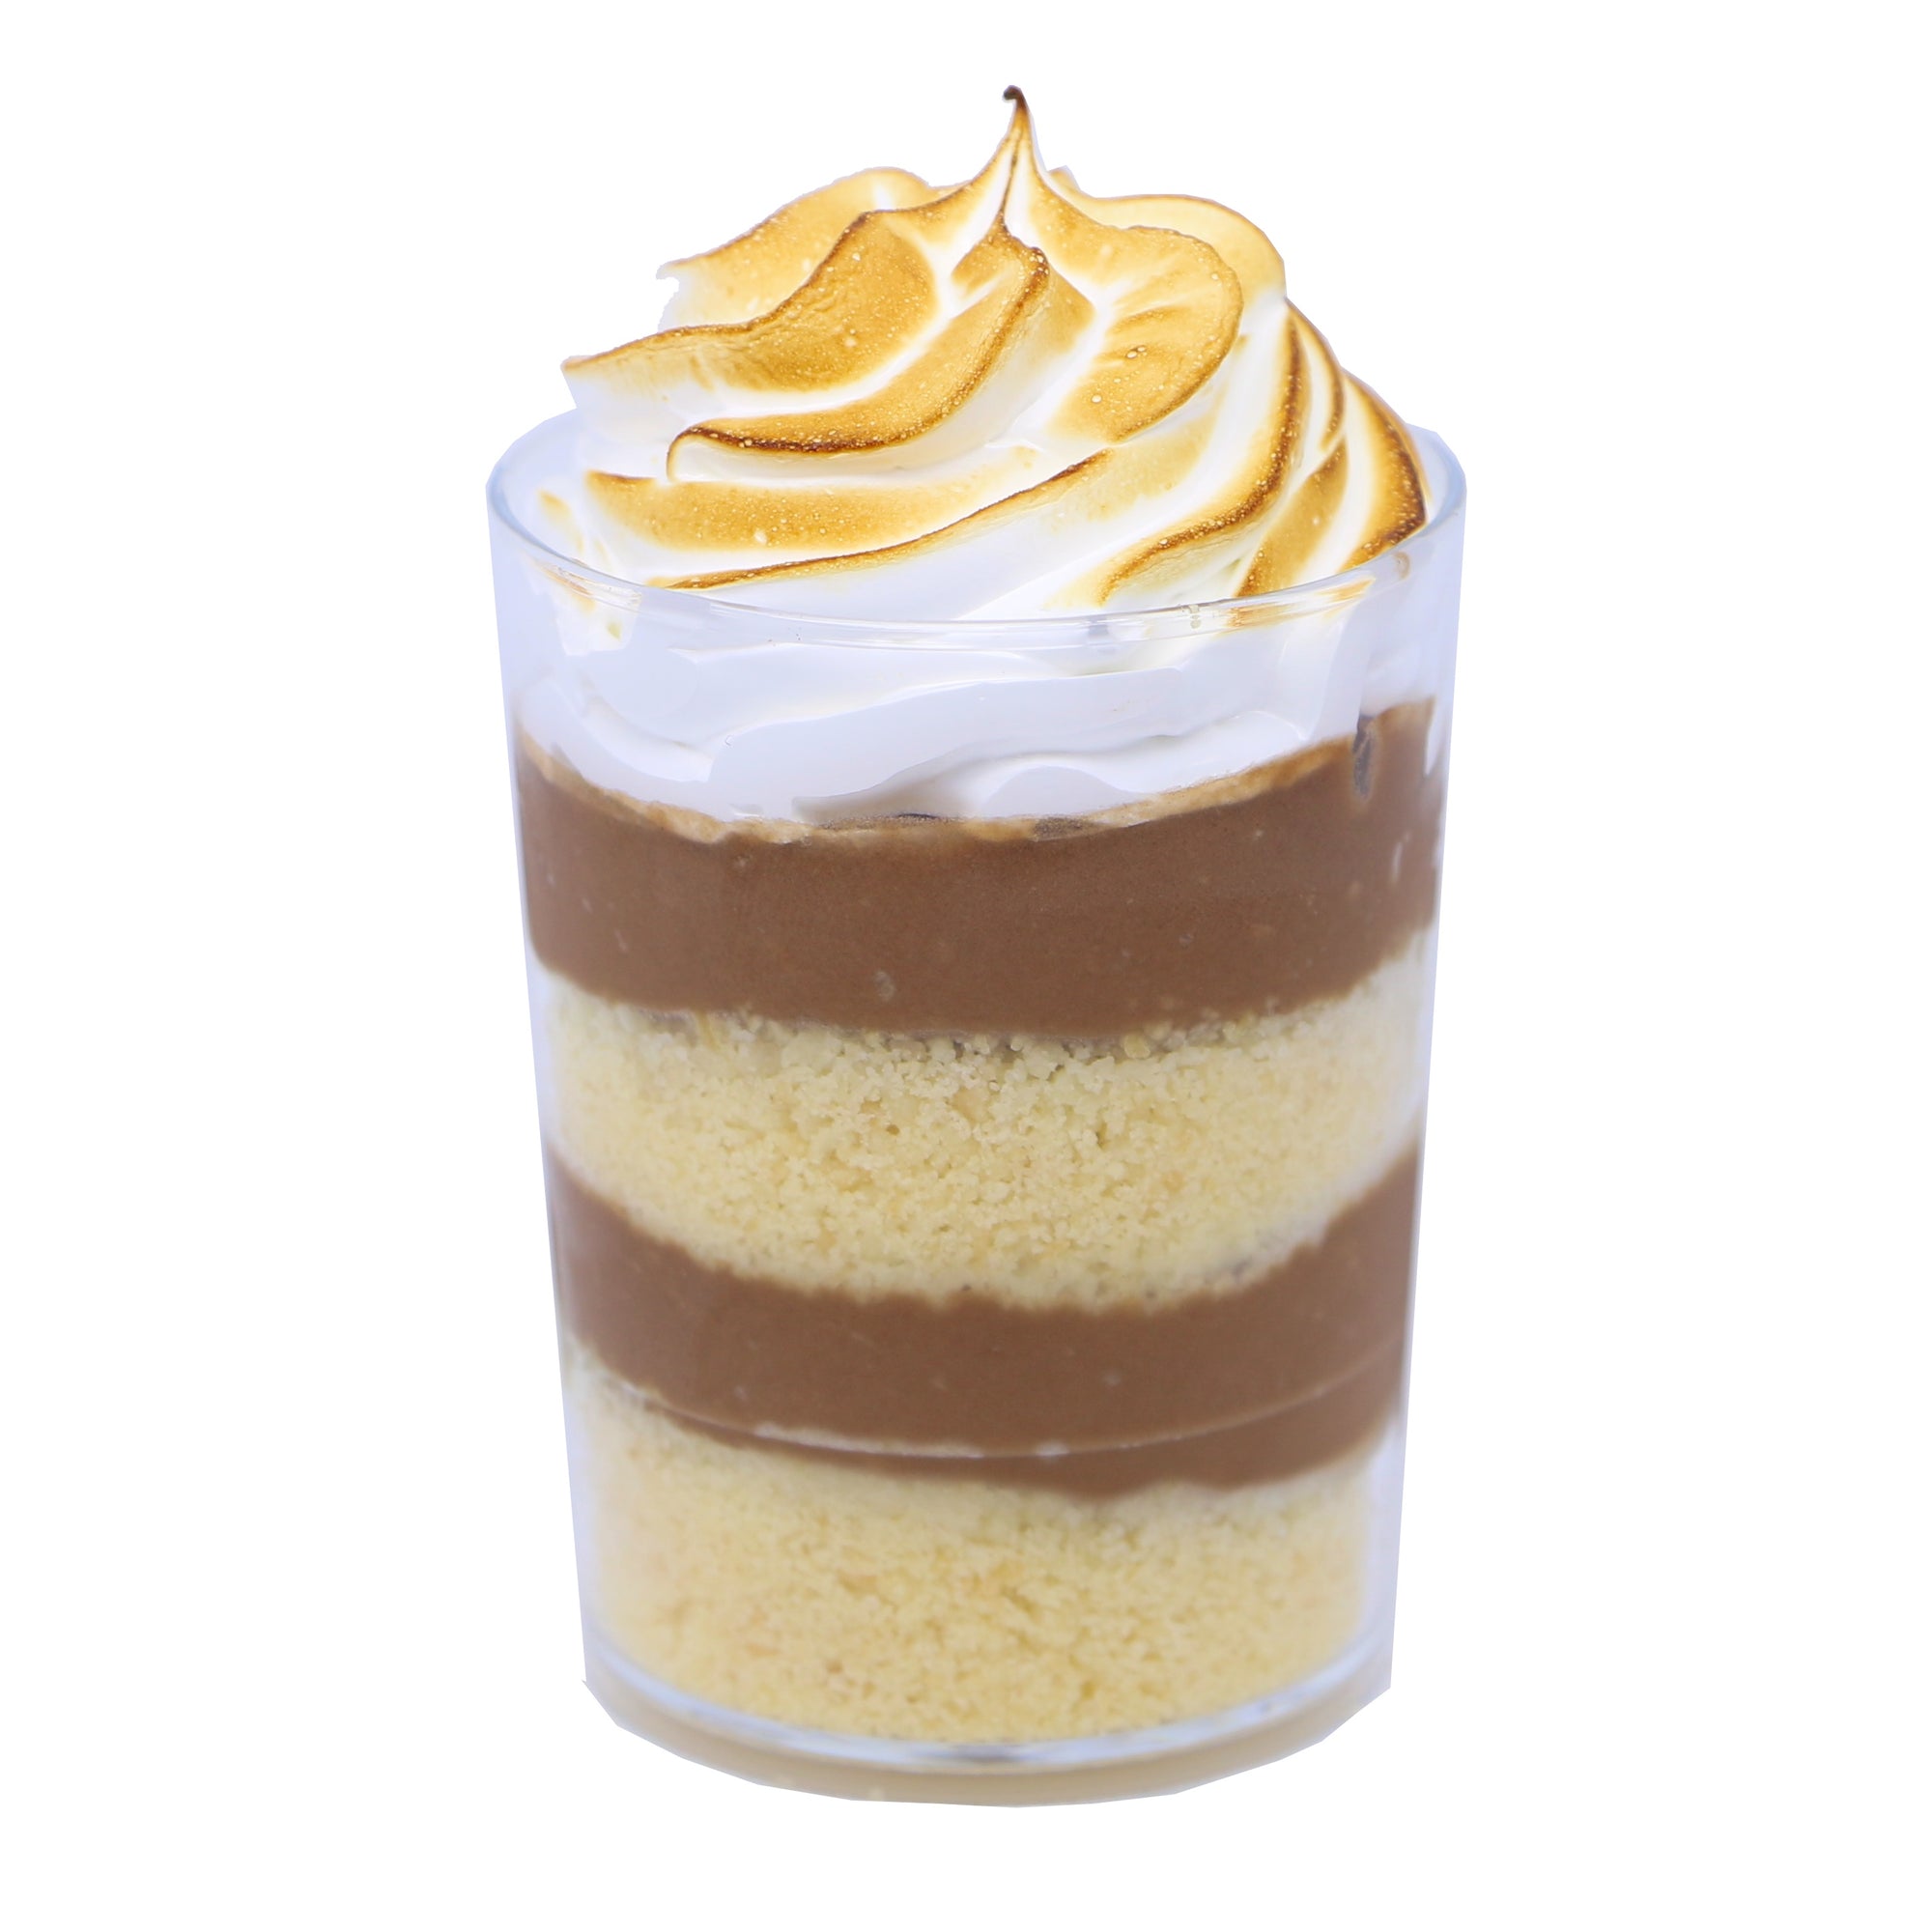 Dessert Cup - S'mores - Treats2eat - Wedding & Birthday Party Dessert Catering Near Me